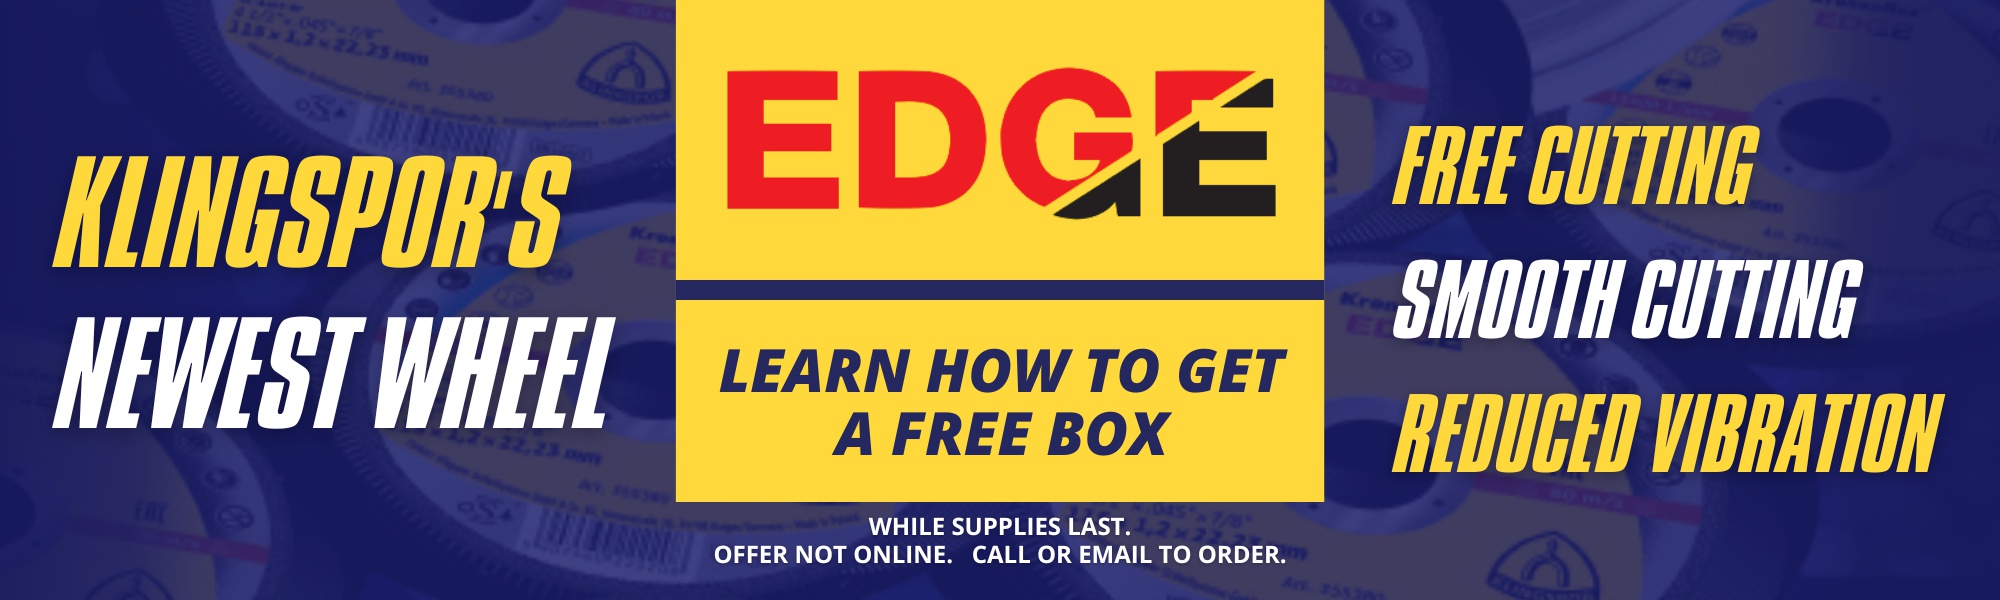 Learn how to get a free box of Edge Wheels.